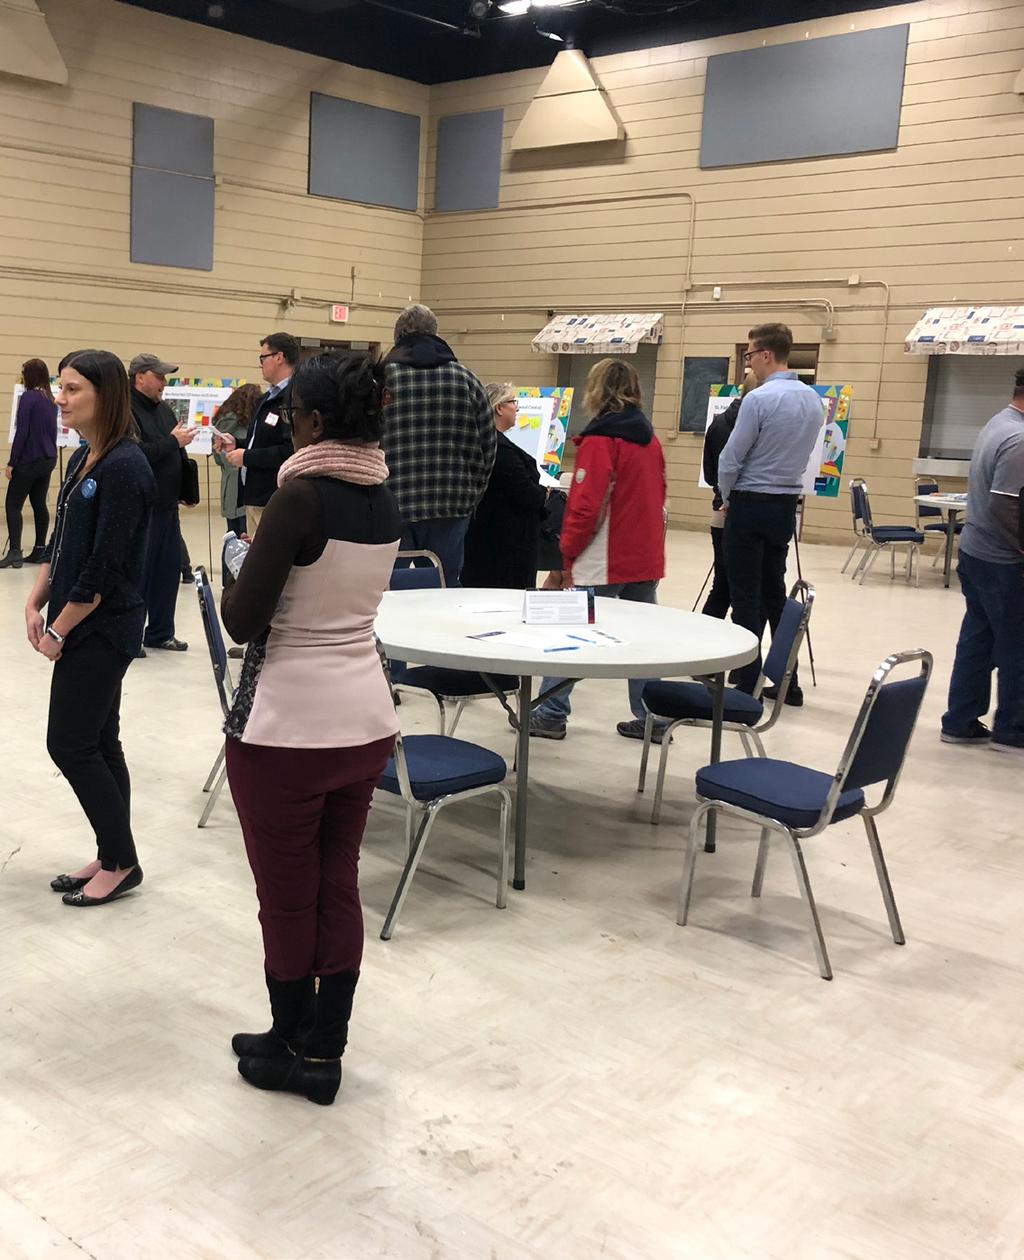 KEY TAKEAWAYS At the preliminary design event, residents had the opportunity to see how the designs had evolved since the Concept phase, and how their input was incorporated into the designs and